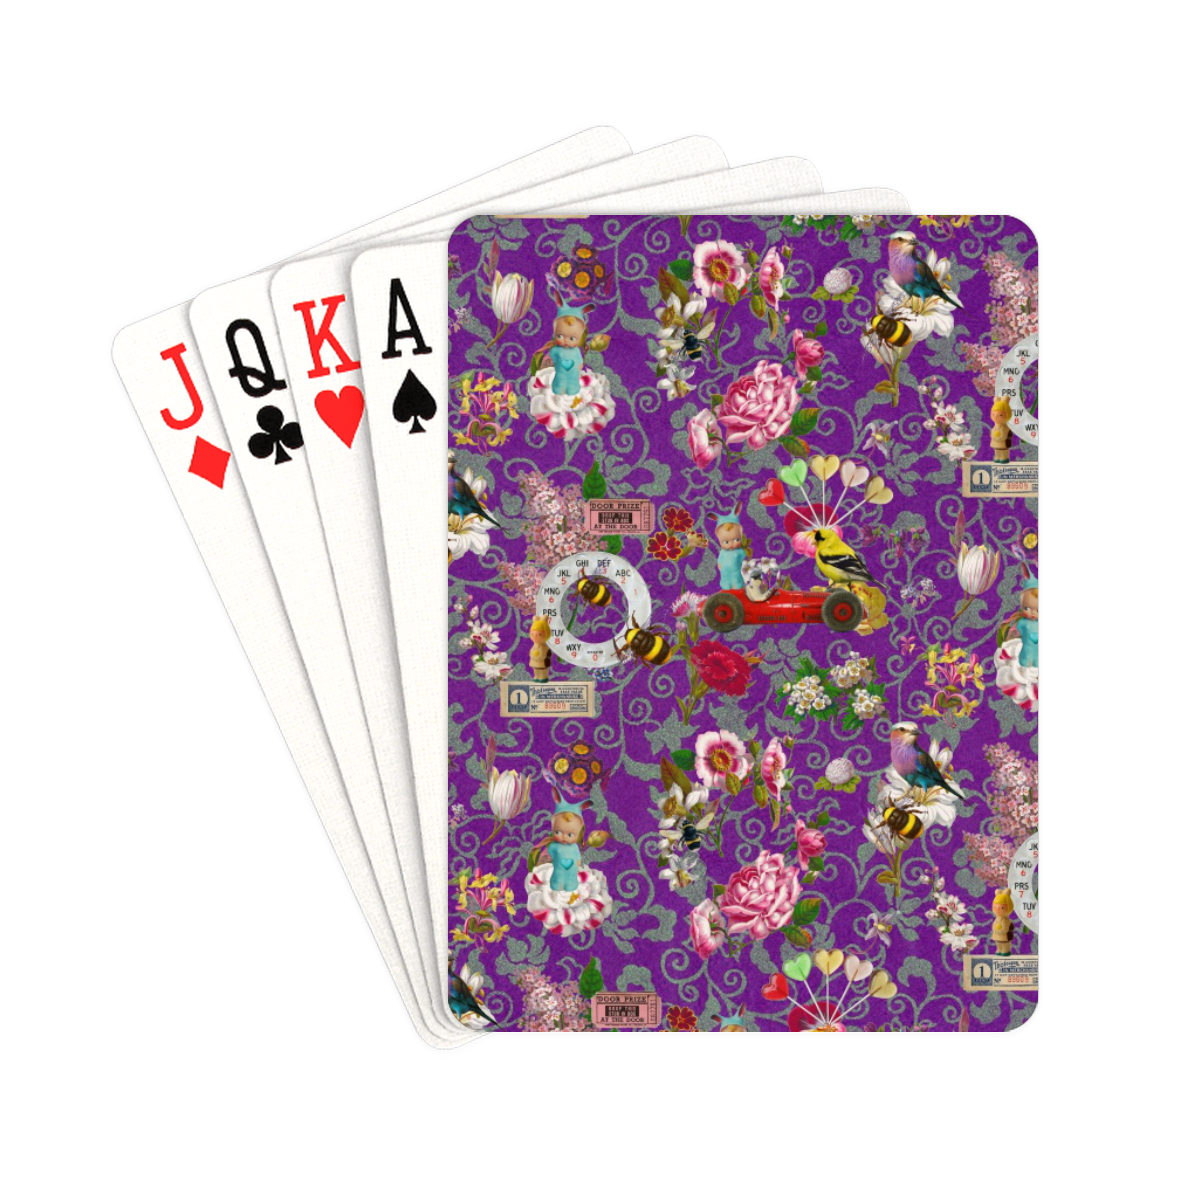 Spring Bank Holiday Playing Cards 2.5"x3.5"